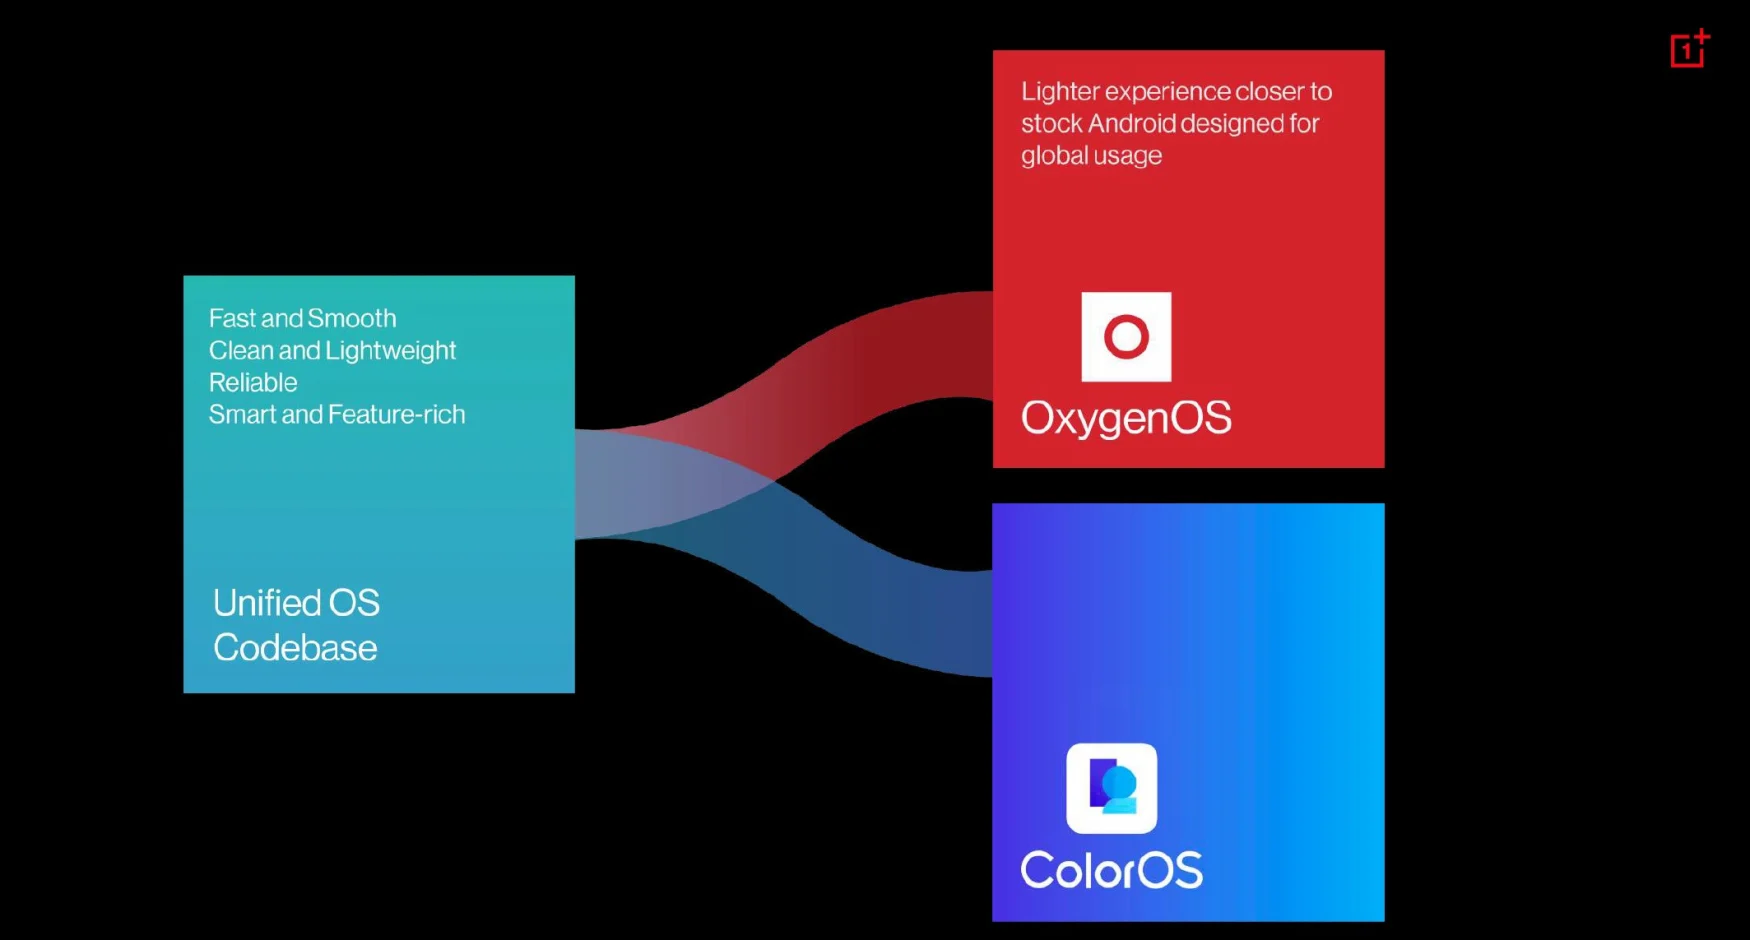 While OxygenOS and ColorOS will continue to exist, both platforms will share a unified codebase instead of being developed fully independently.